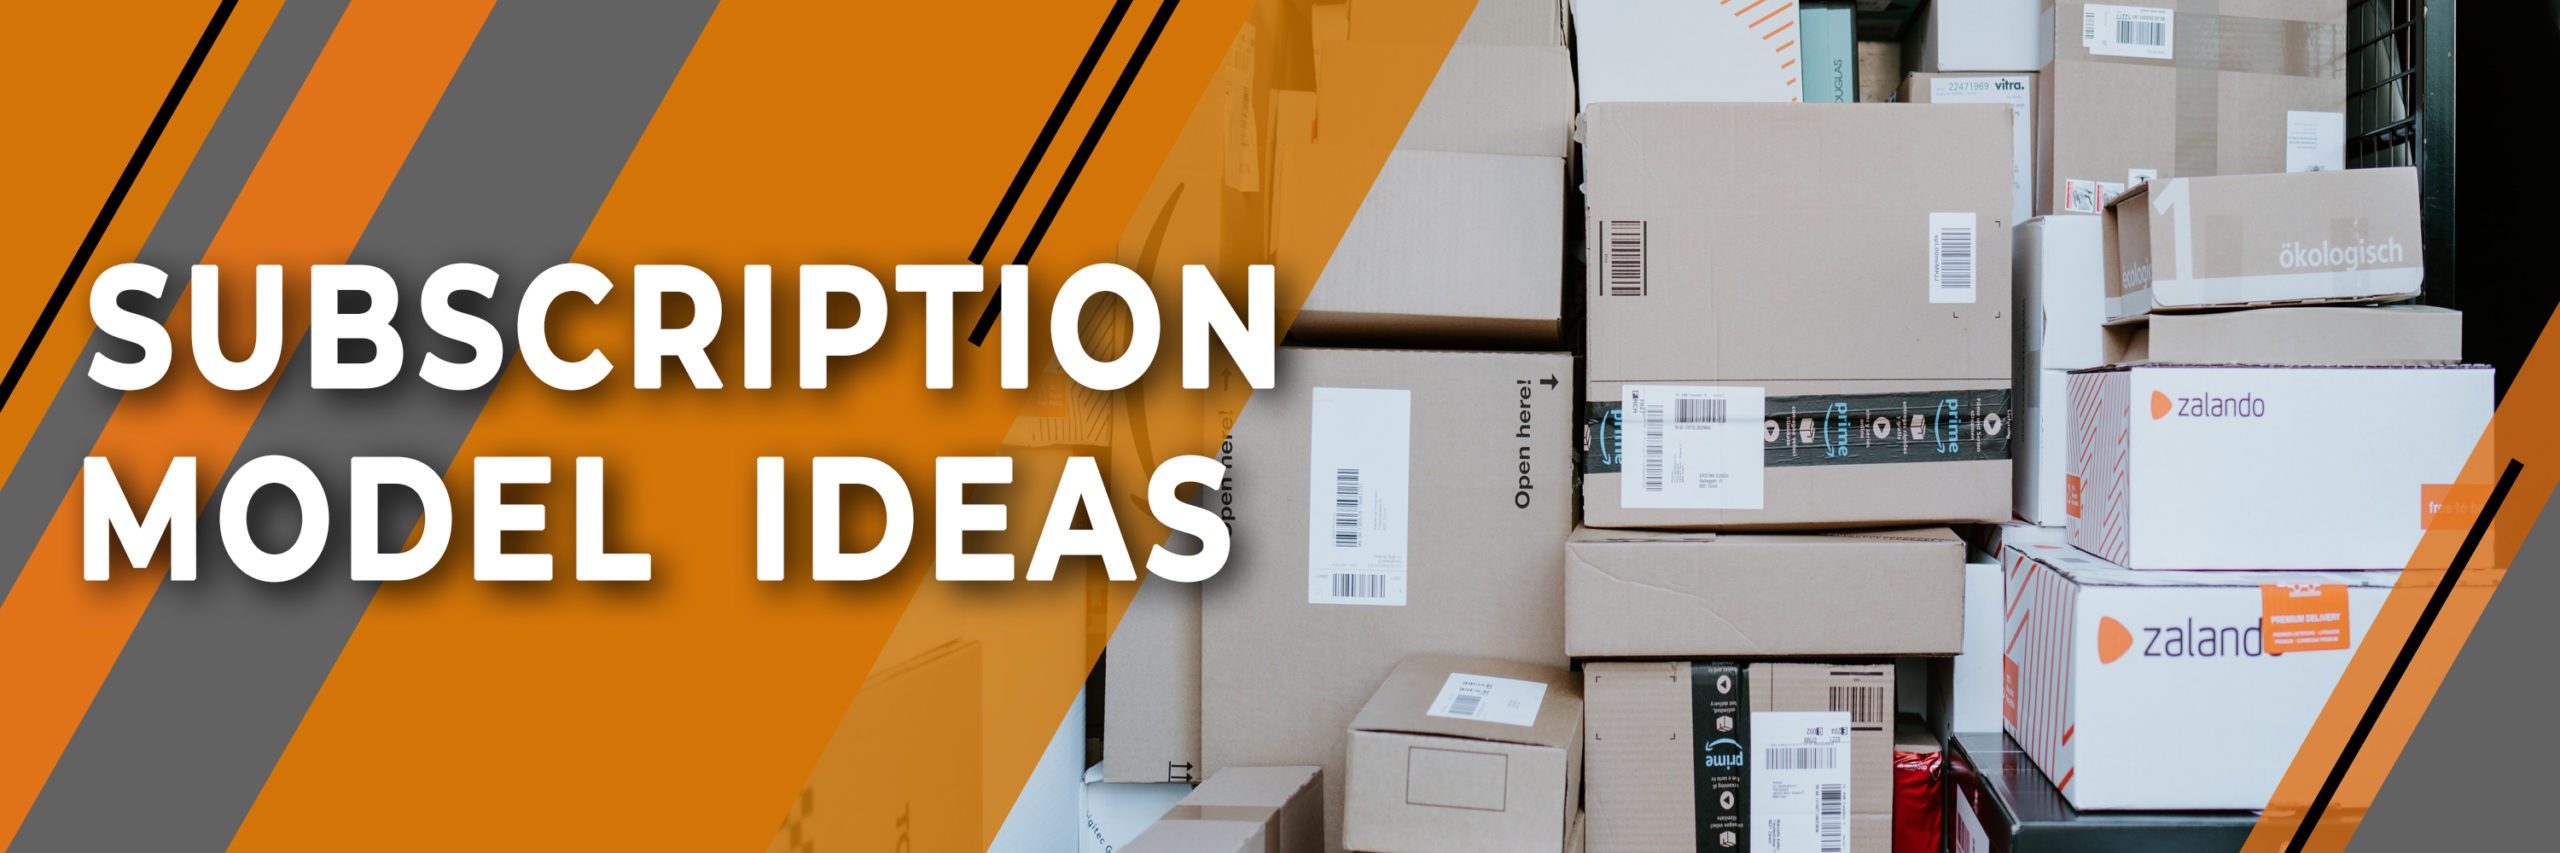 Subscription model ideas for your business